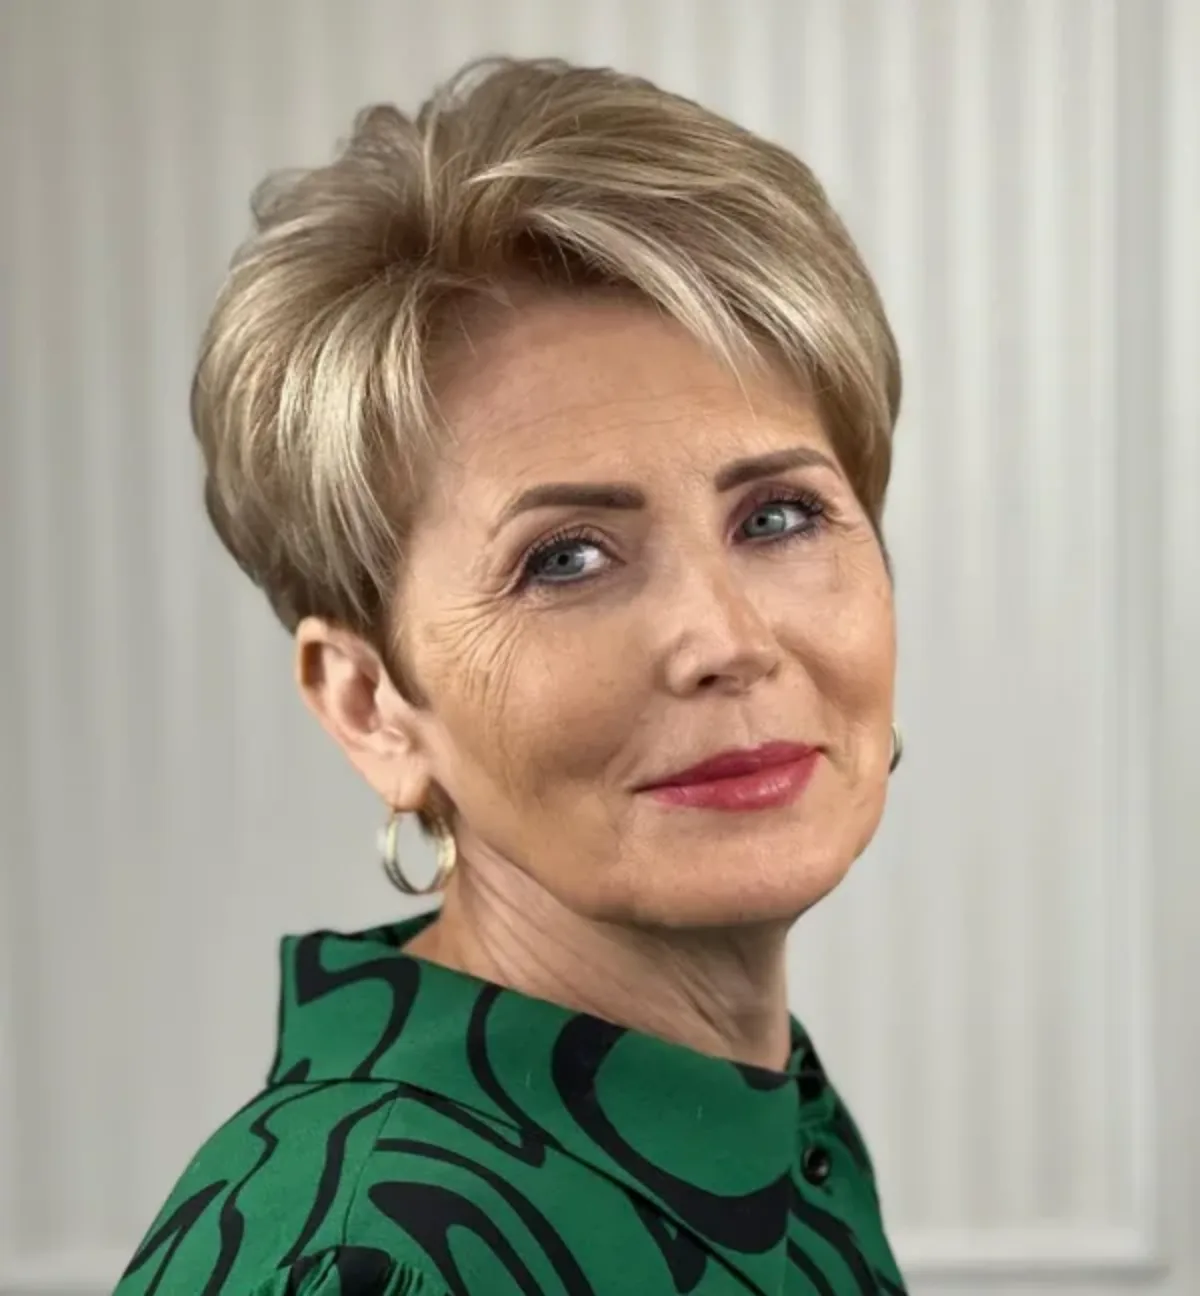 60 year old woman pixie cut with blonde highlights